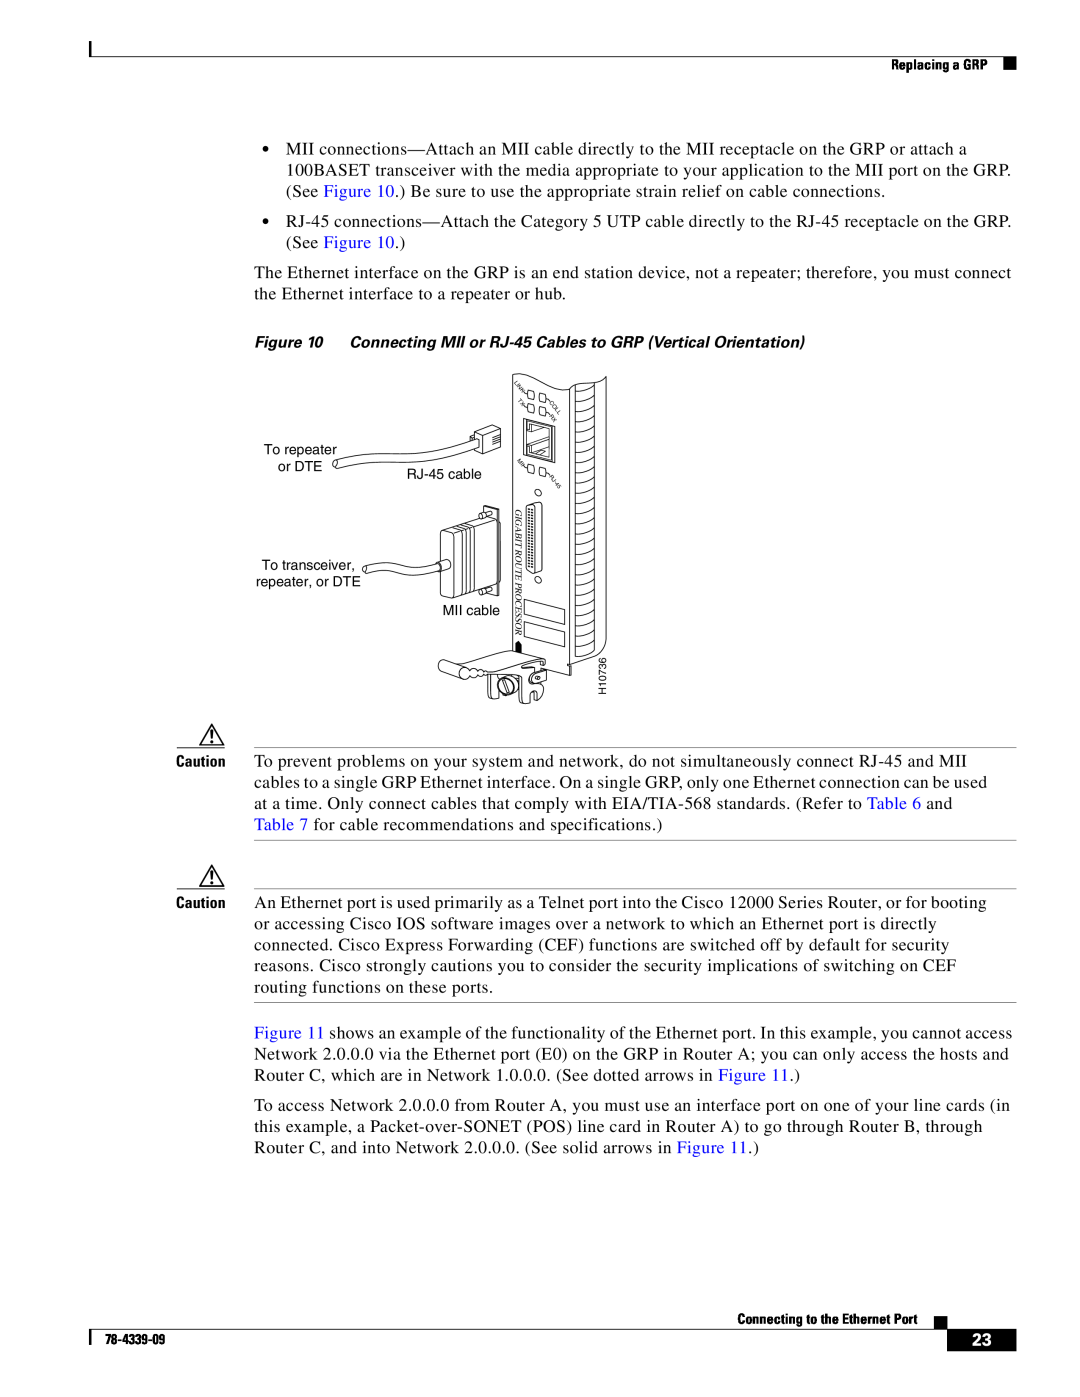 Cisco Systems GRP-B manual Connecting MII or RJ-45 Cables to GRP Vertical Orientation, MII cable 